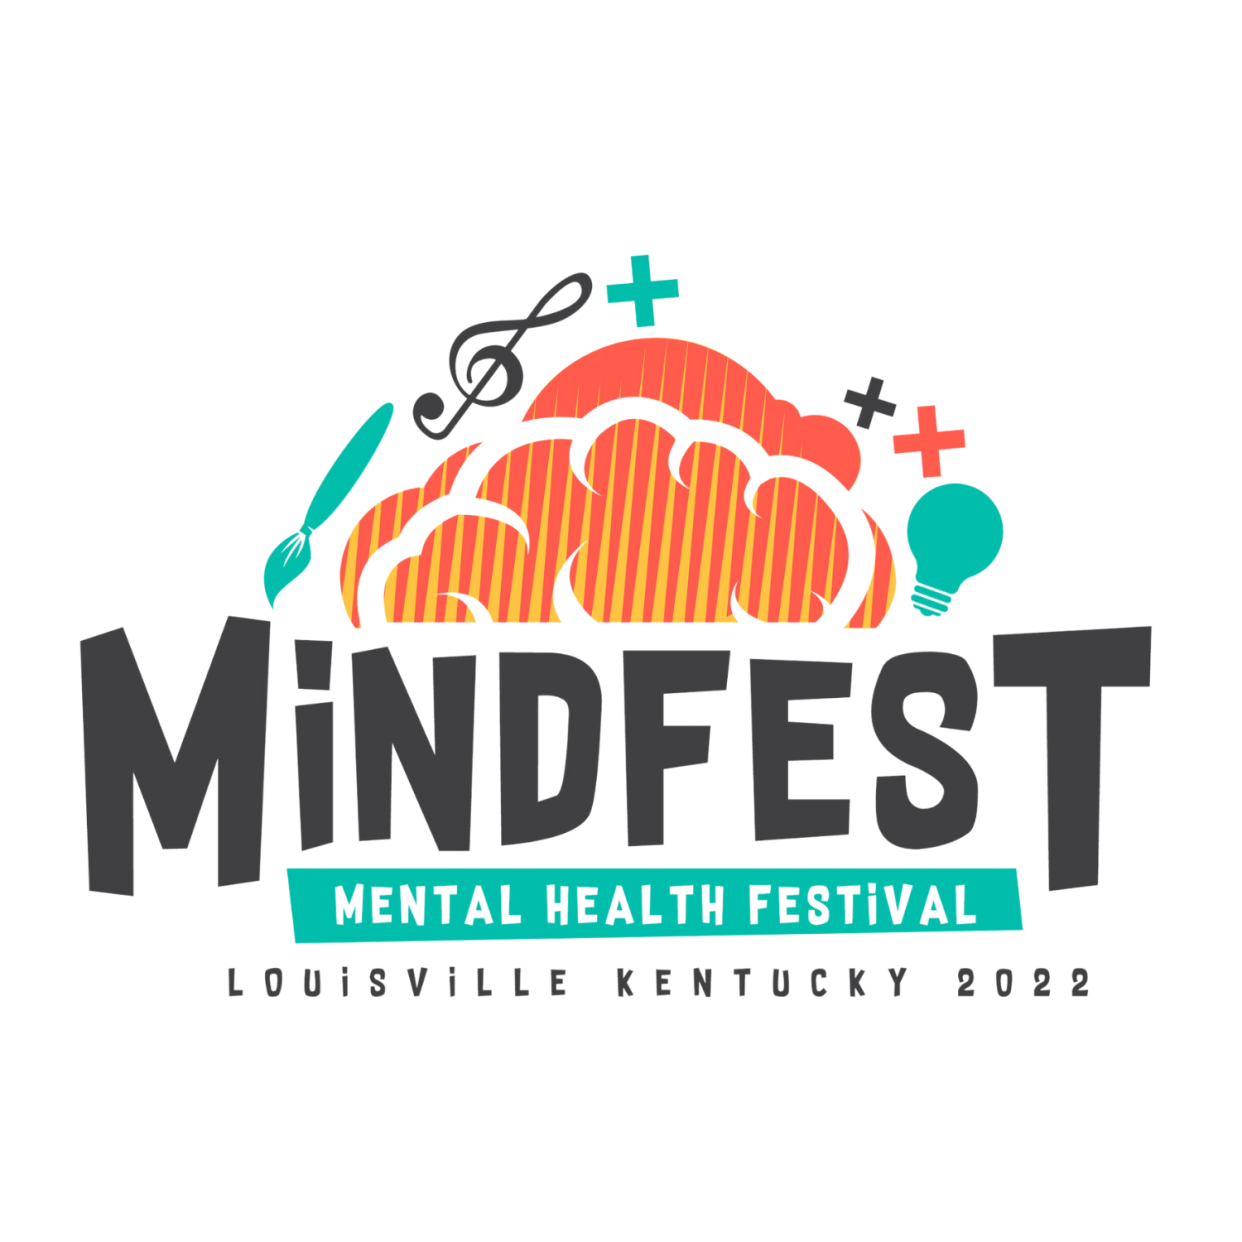 MindFEST will be the first mental health festival in Louisville.